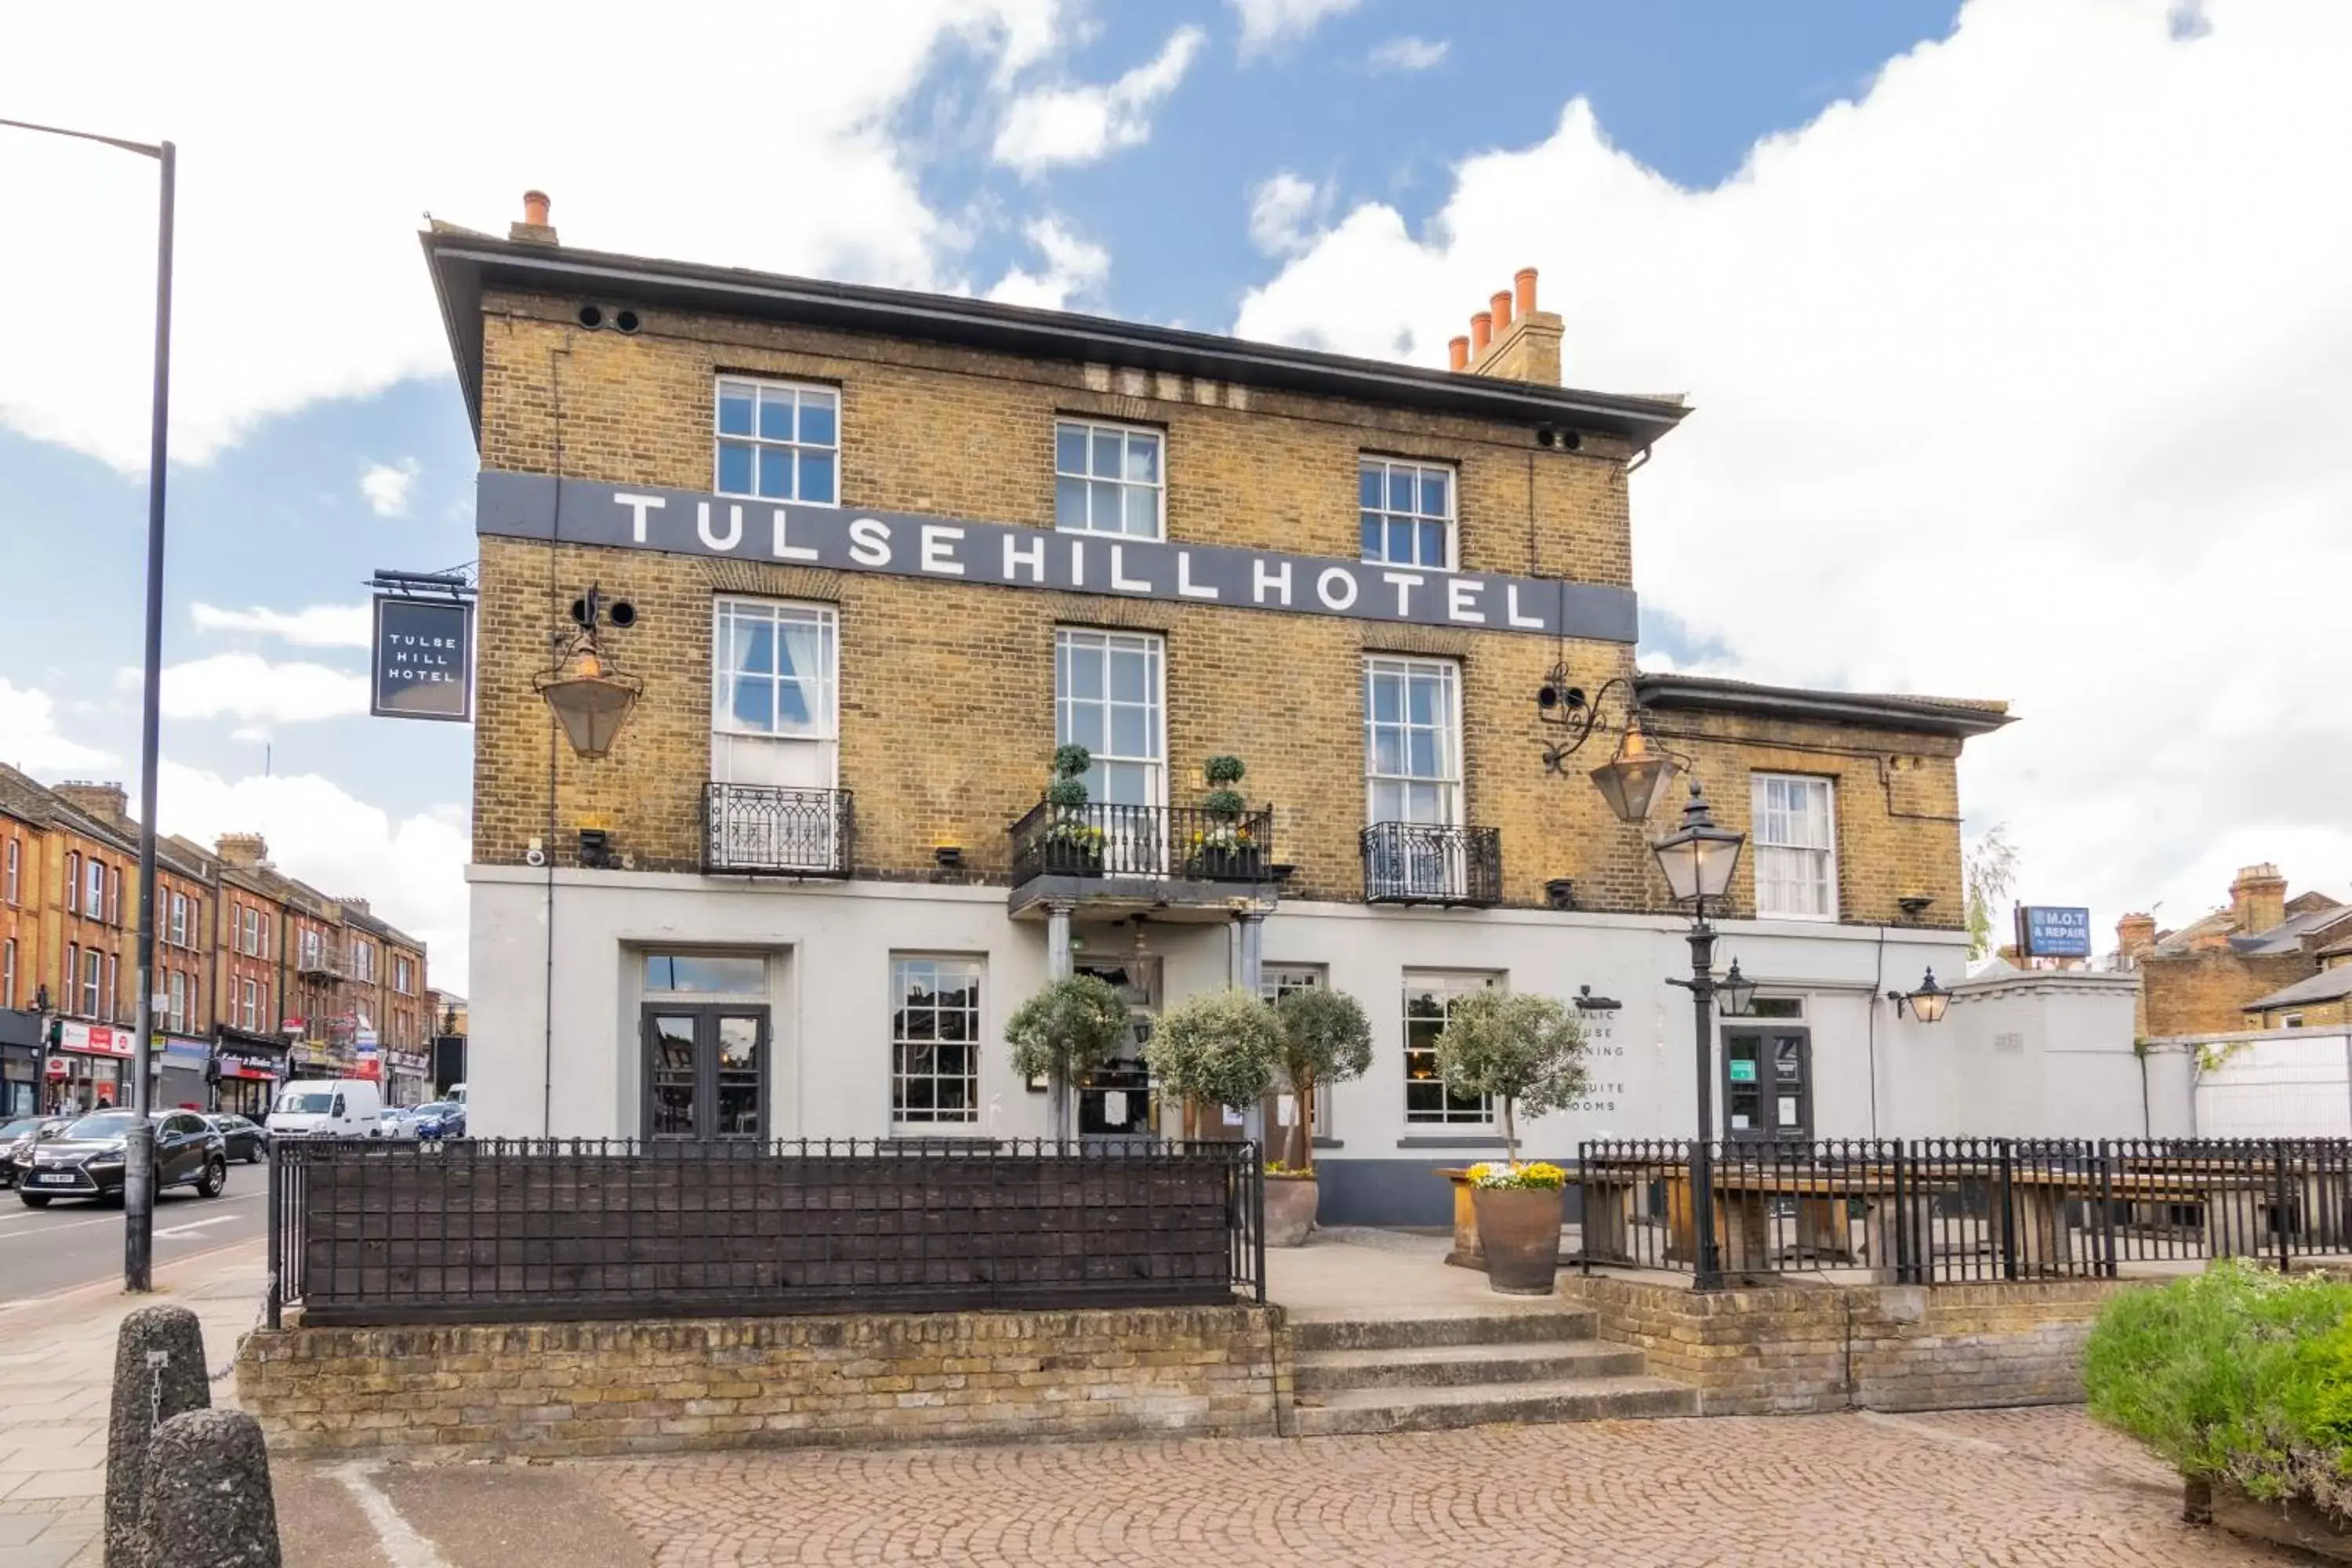 Property Building in Tulse Hill Hotel